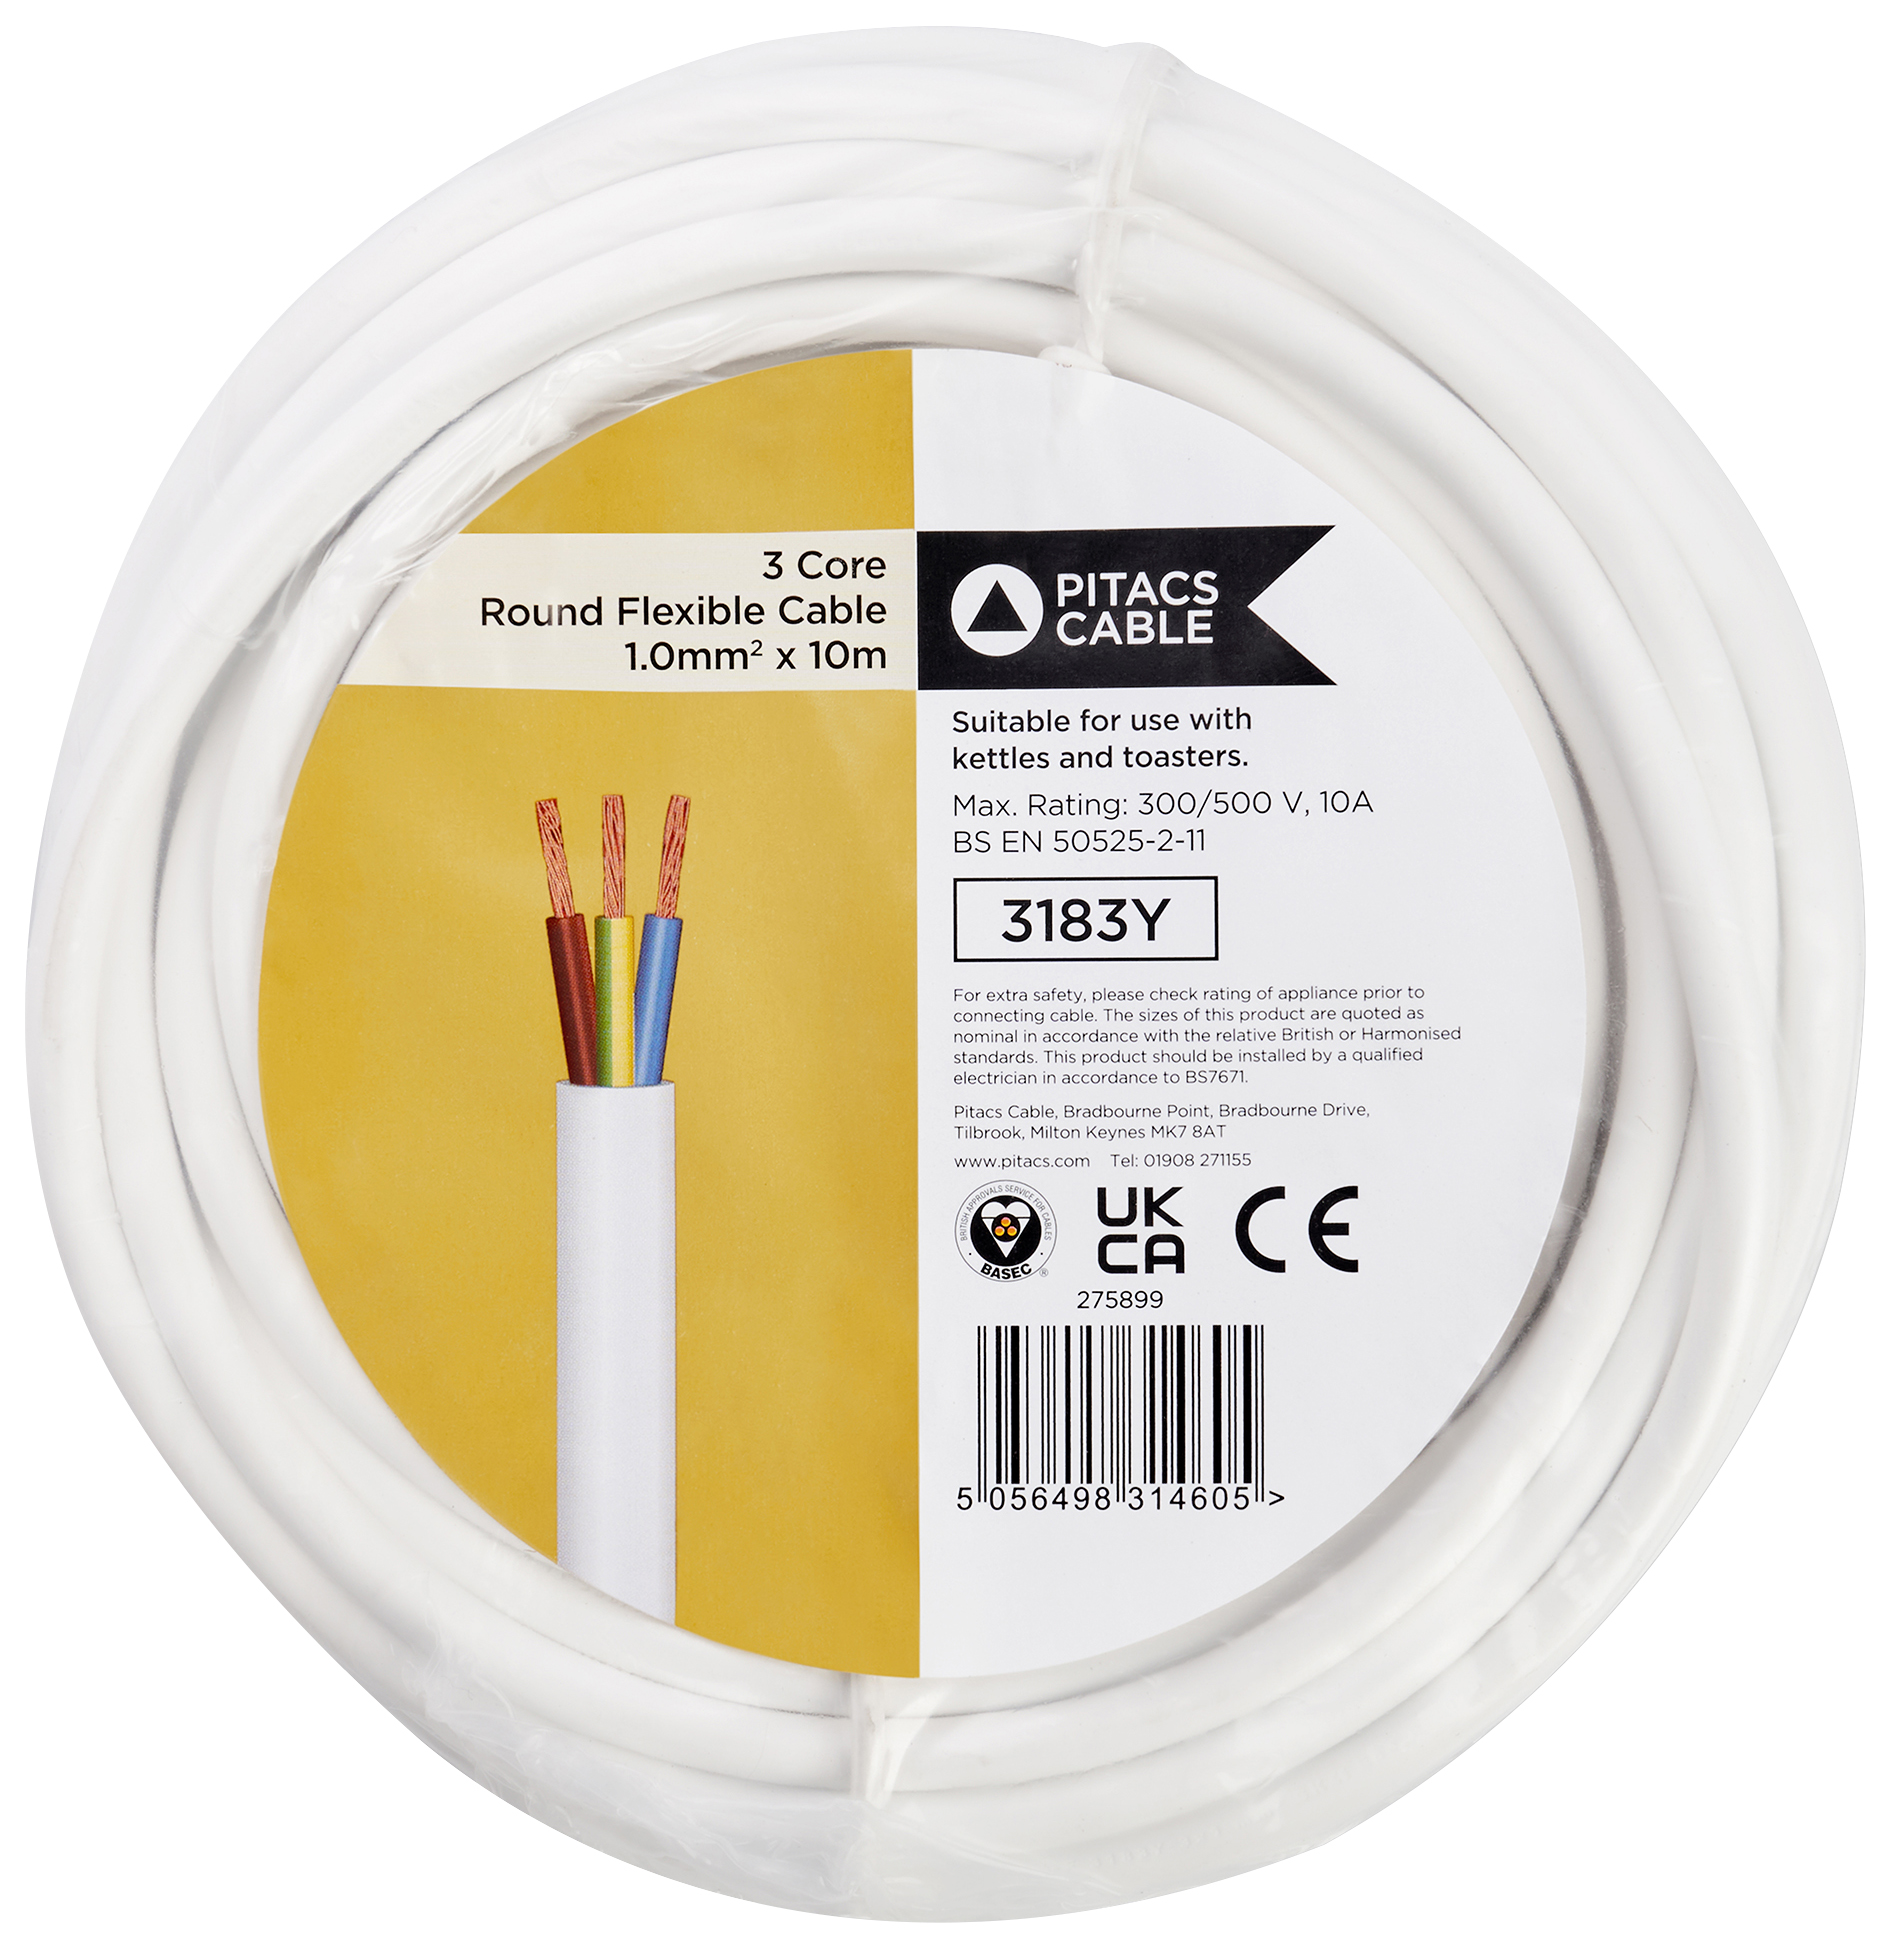 3 Core 3183Y White Round Flexible Cable - 1mm2 - 10m